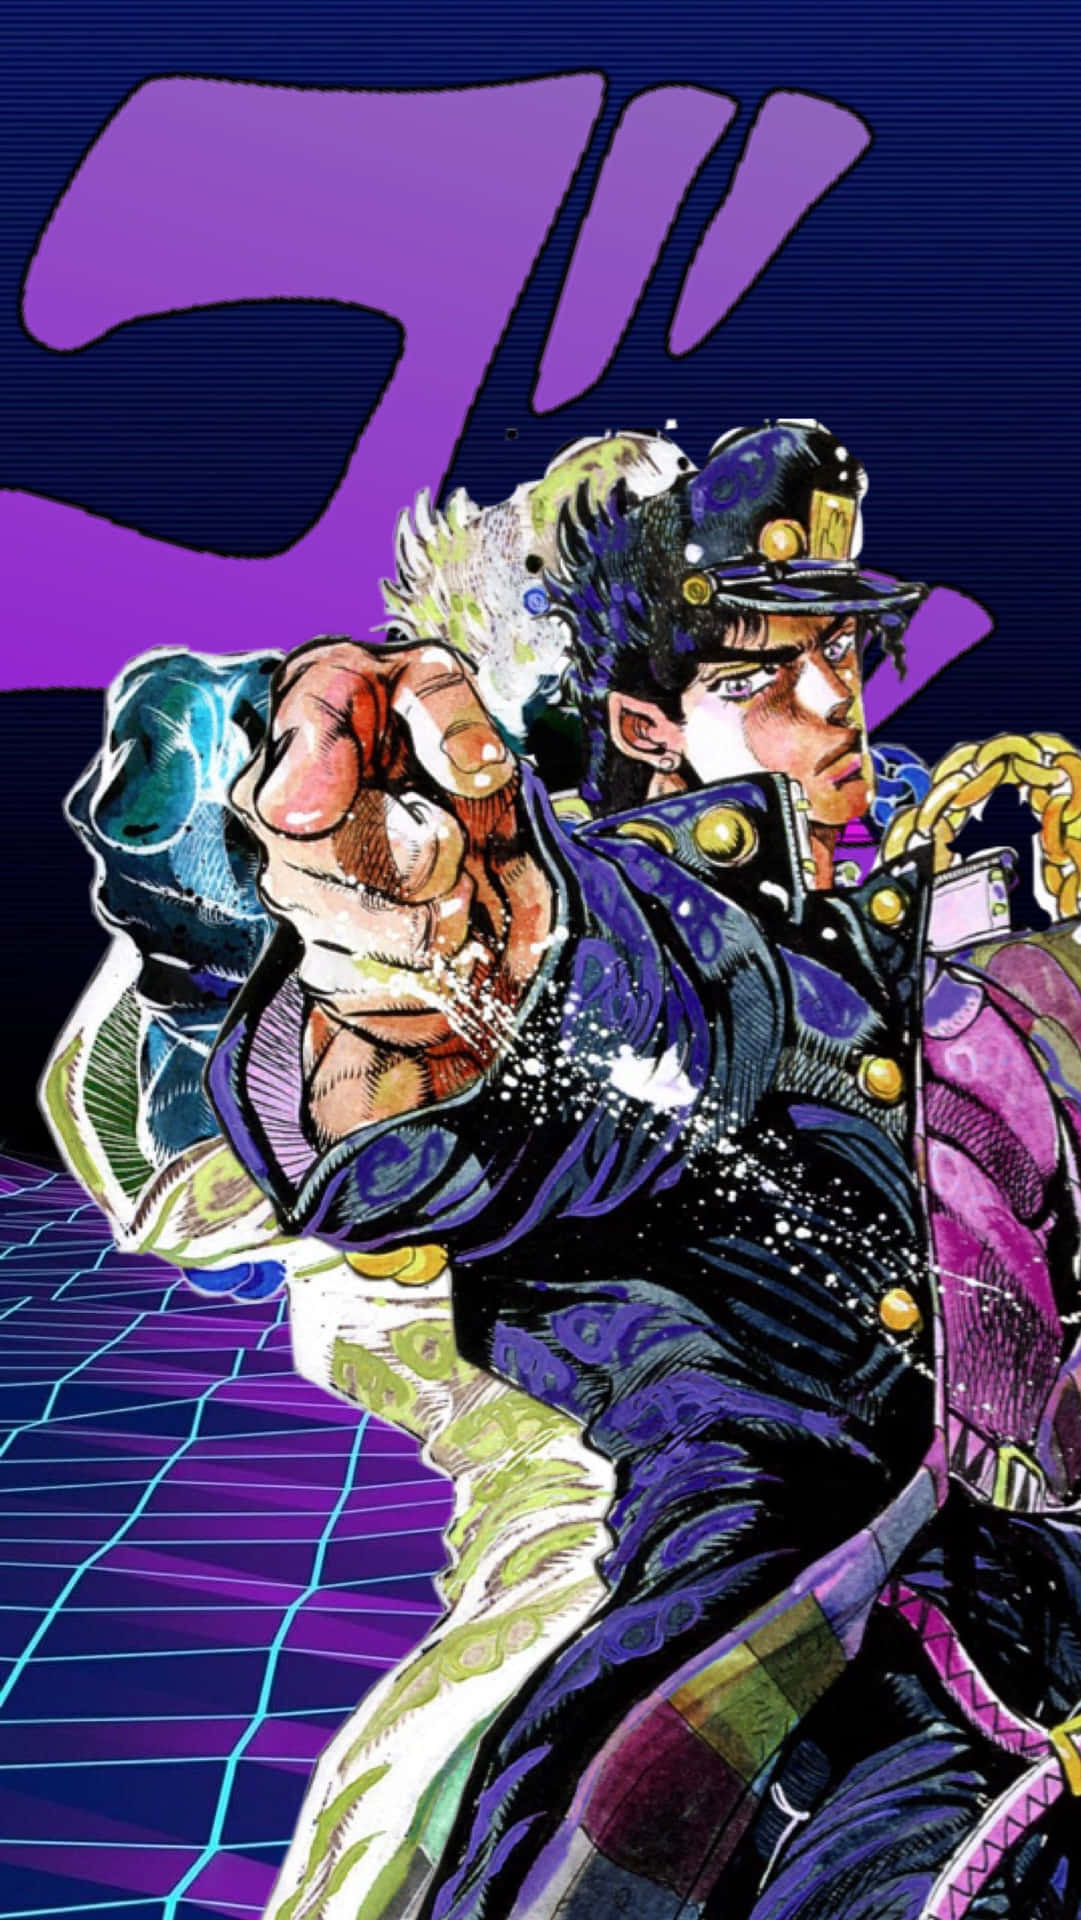 Jotaro Kujo facing off against DIO in an epic standoff.